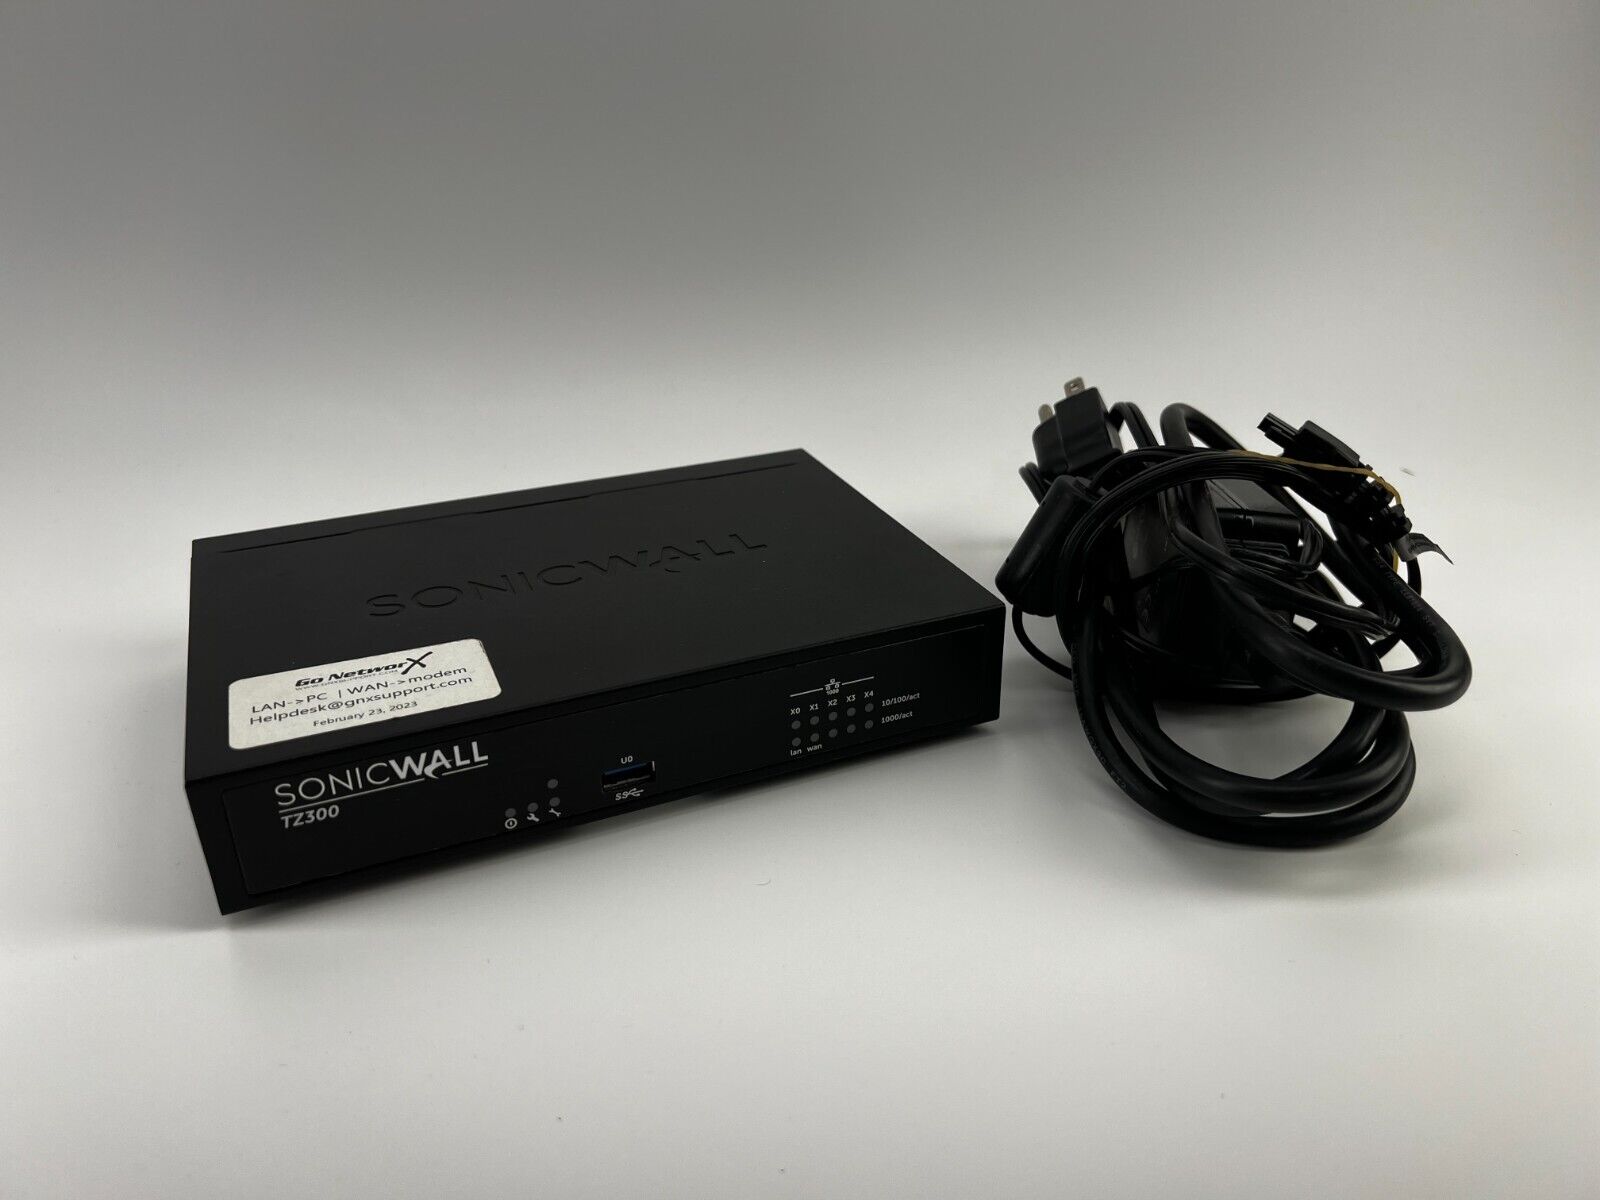 Dell SonicWall TZ300 - 5-Port Network Security Firewall Appliance